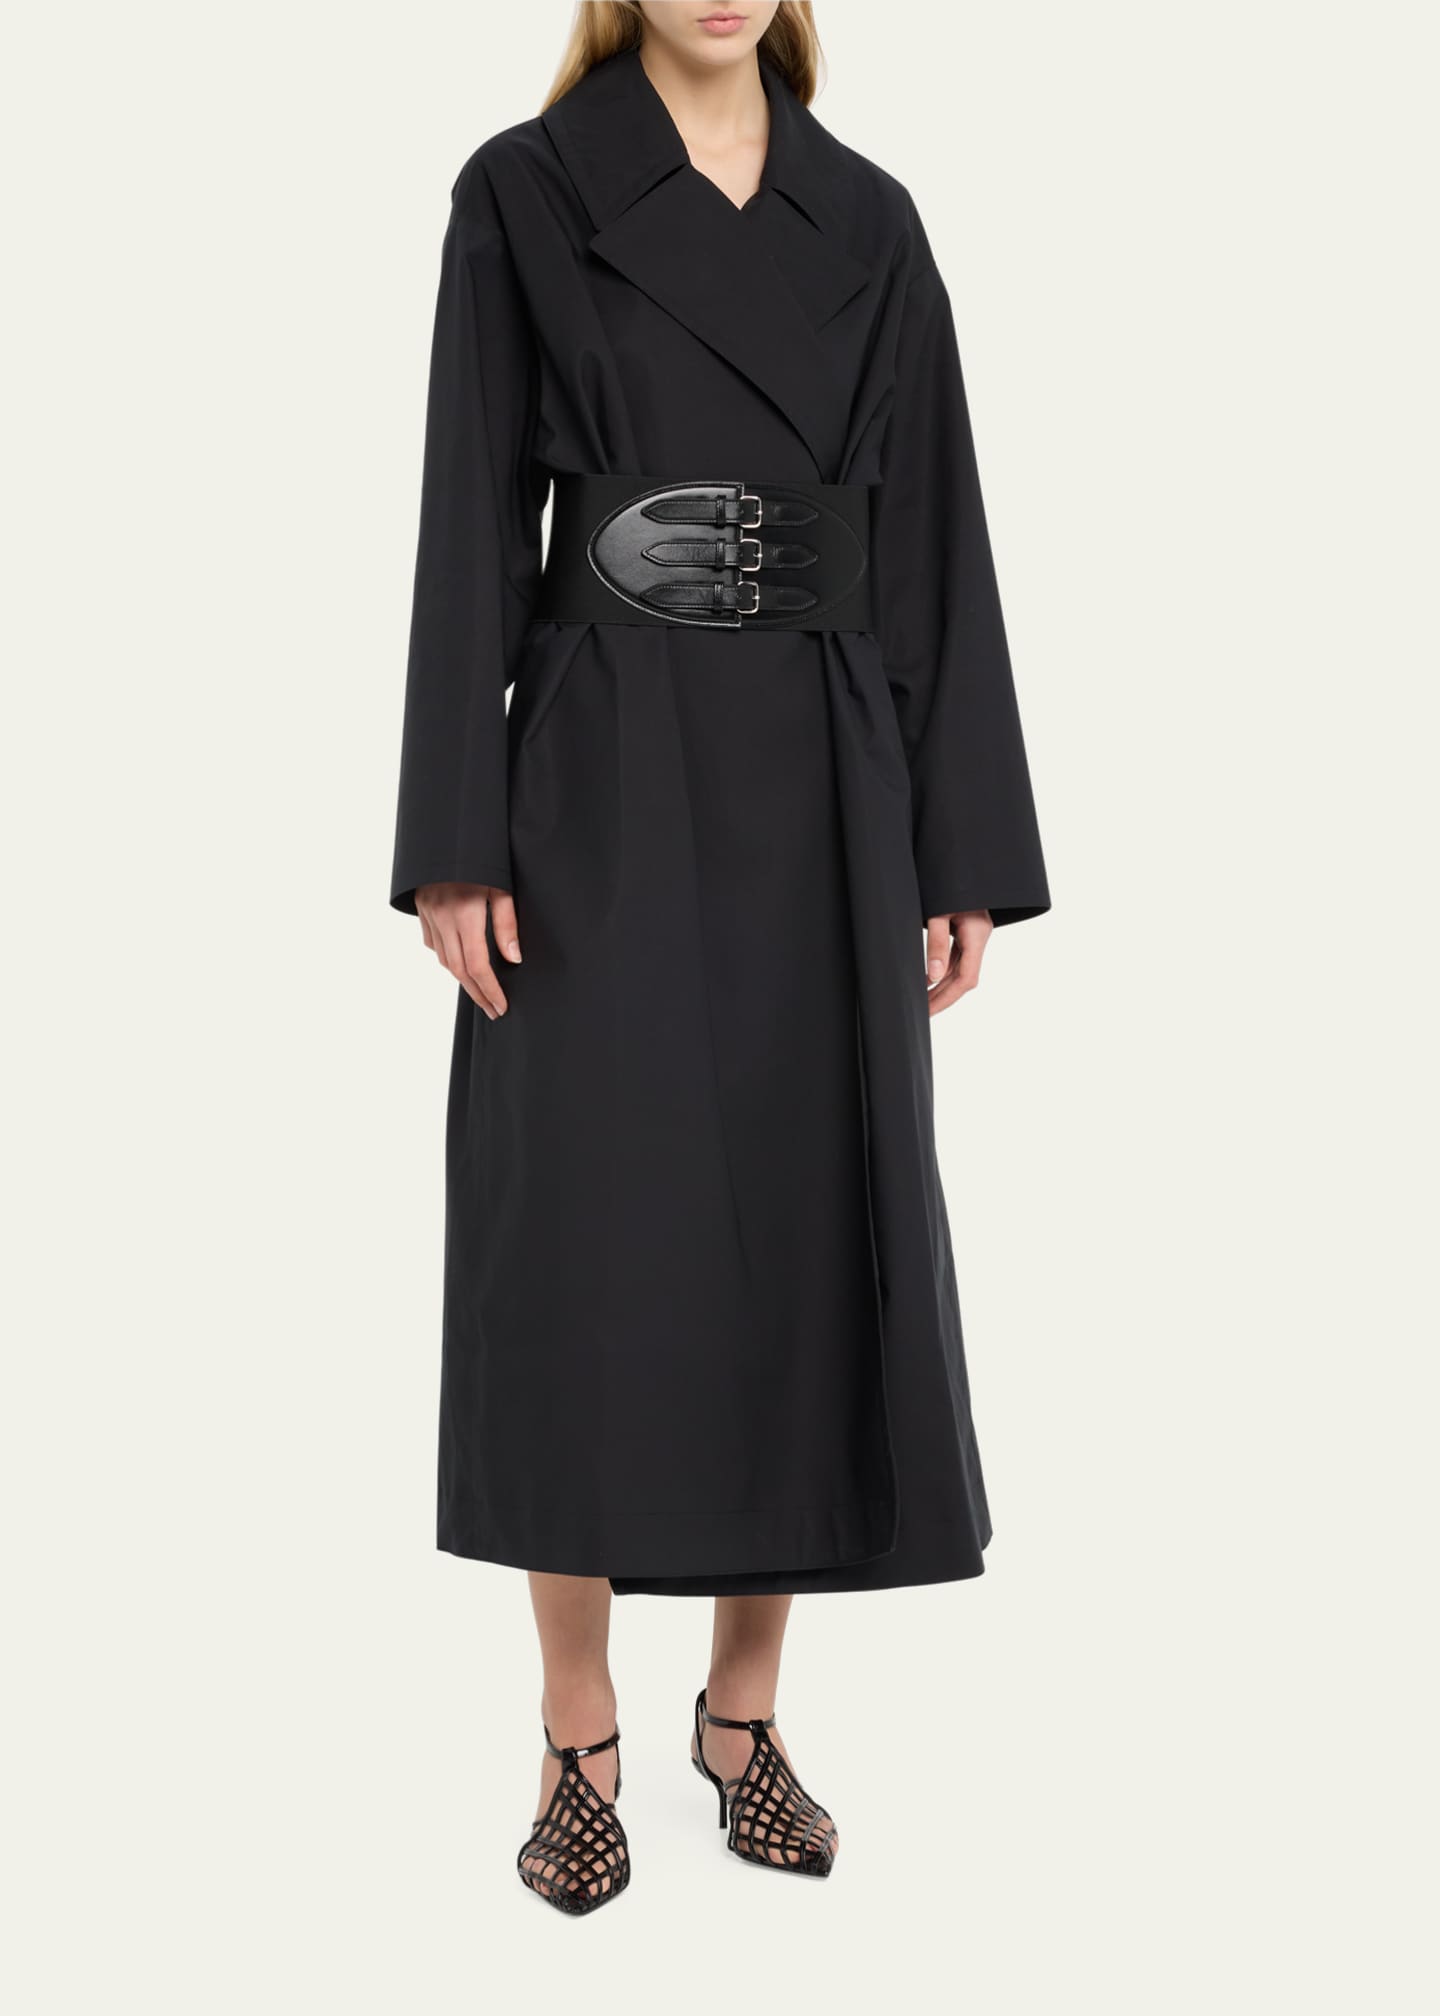 ALAIA Long Trench Coat with Leather Corset Belt - Bergdorf Goodman